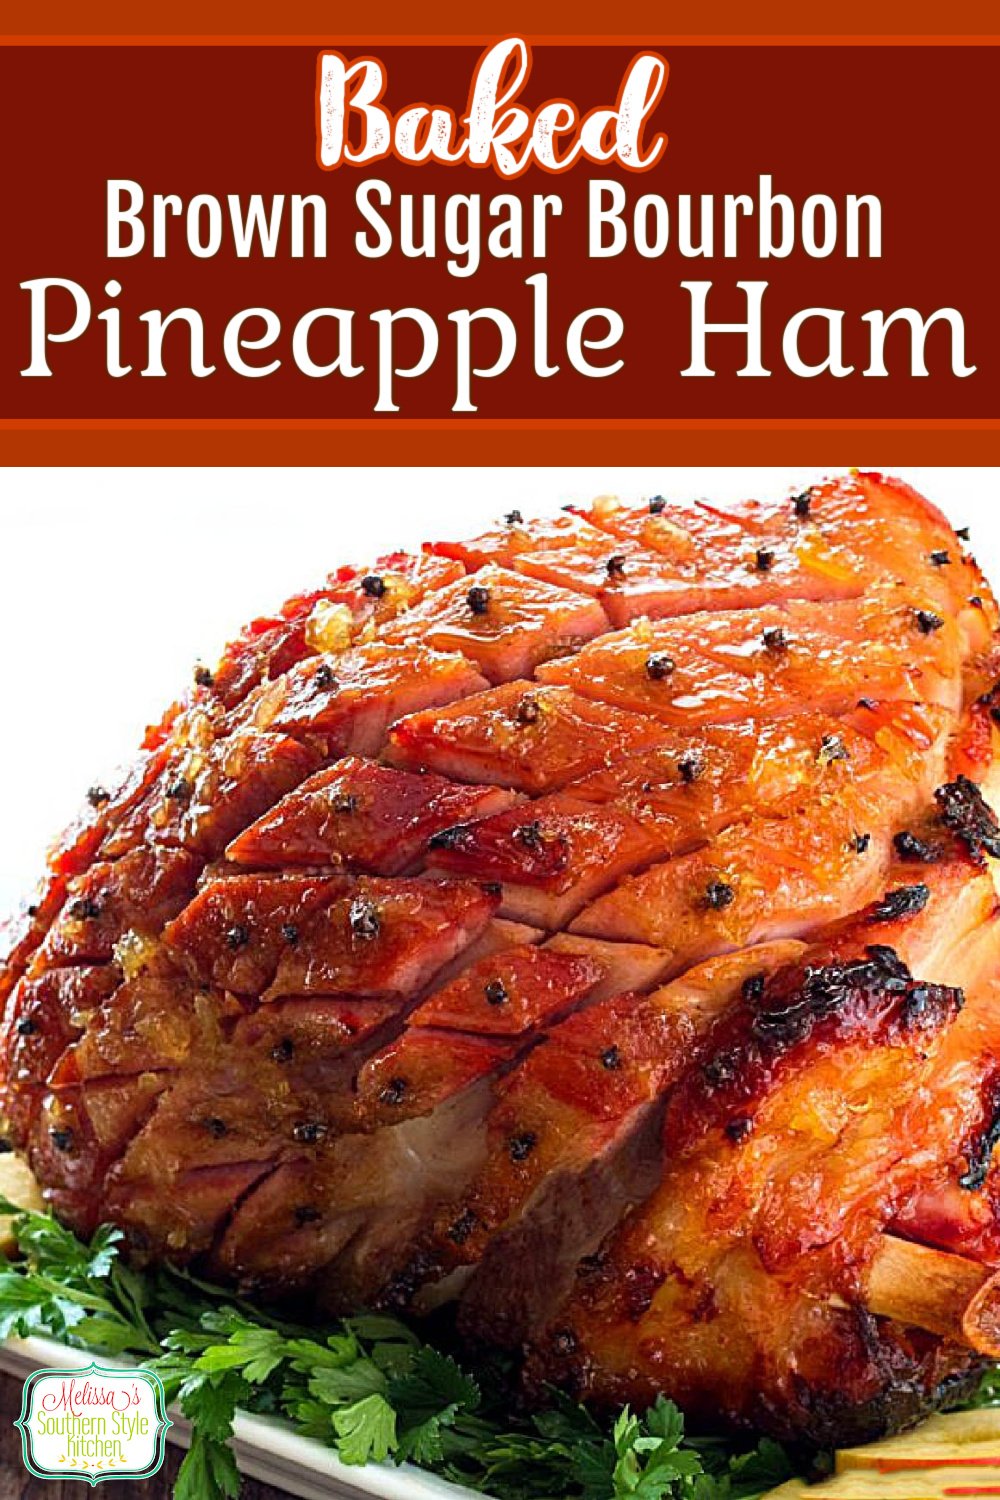 Brown Sugar Bourbon Pineapple Glazed Ham is the perfect centerpiece for your holiday table #brownsugarham #hamrecipes #southernham #bakedhamrecipes #brownsugarhamrecipe #borubonglazedham #easterrecipes #christmasrecipes #thanksgivingrecipes #glazedham #southernrecipes #southernfood #melissassouthernstylekitchen via @melissasssk